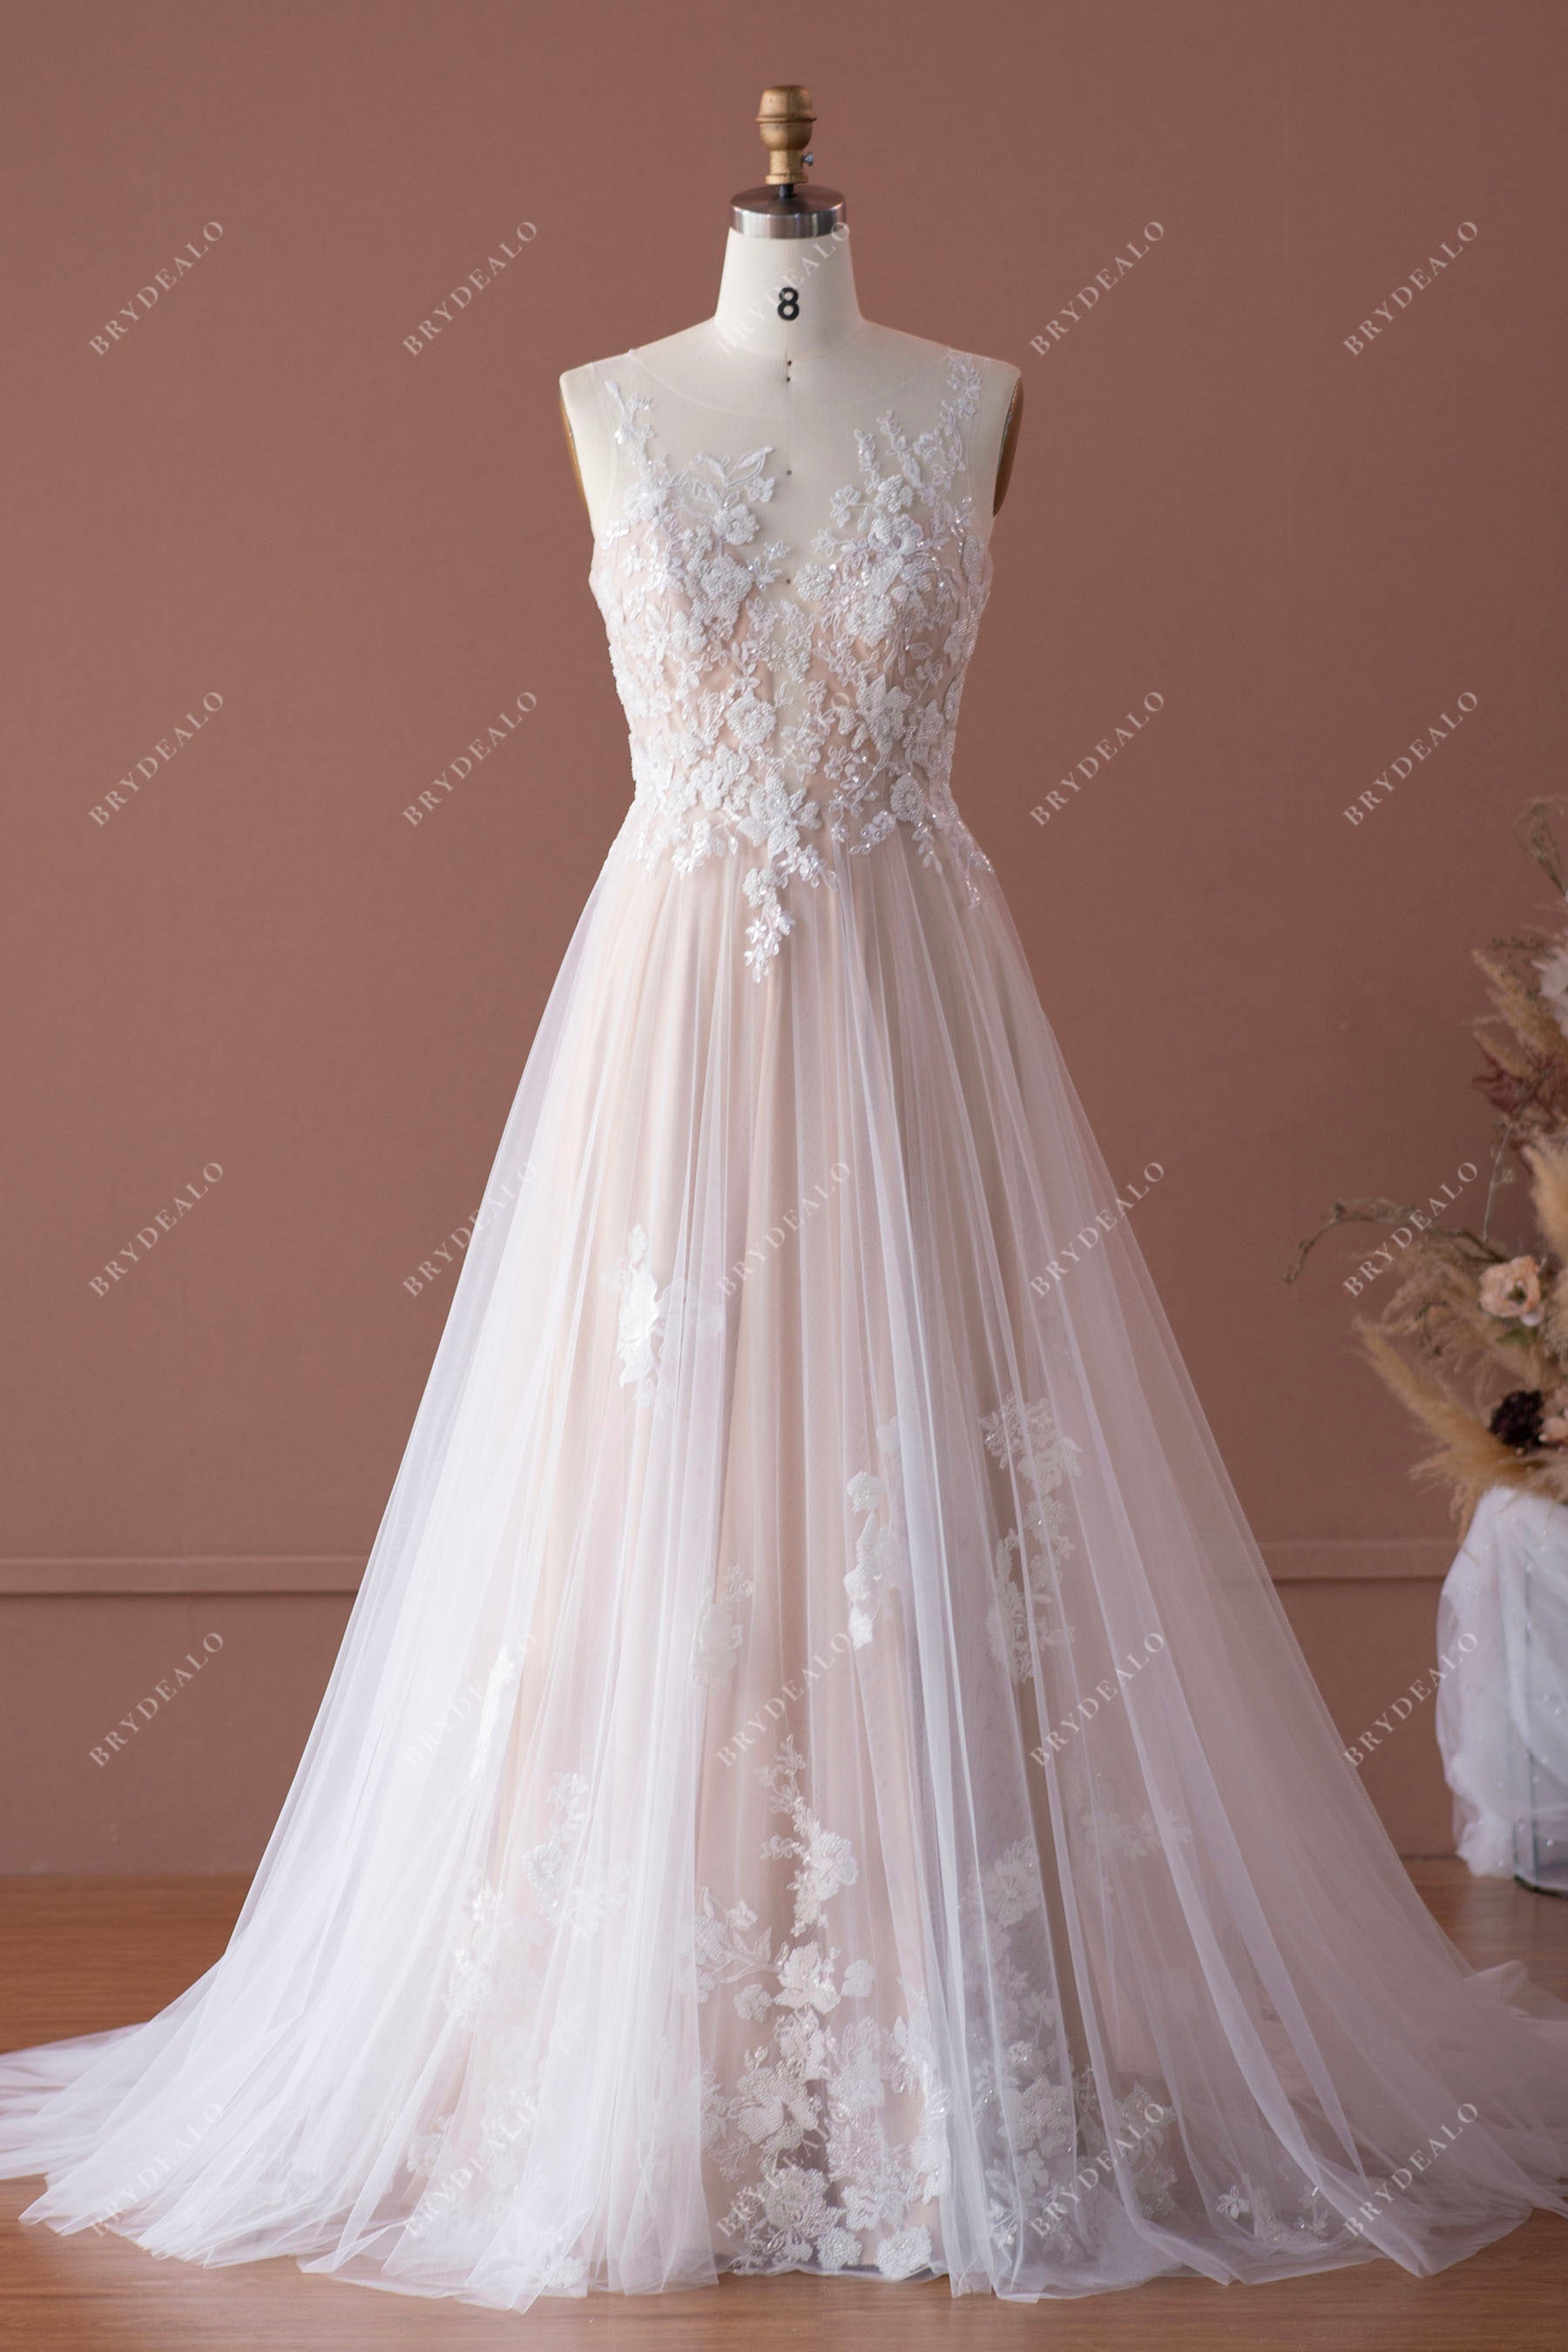 illusion neck beaded lace A-line wedding dress sample